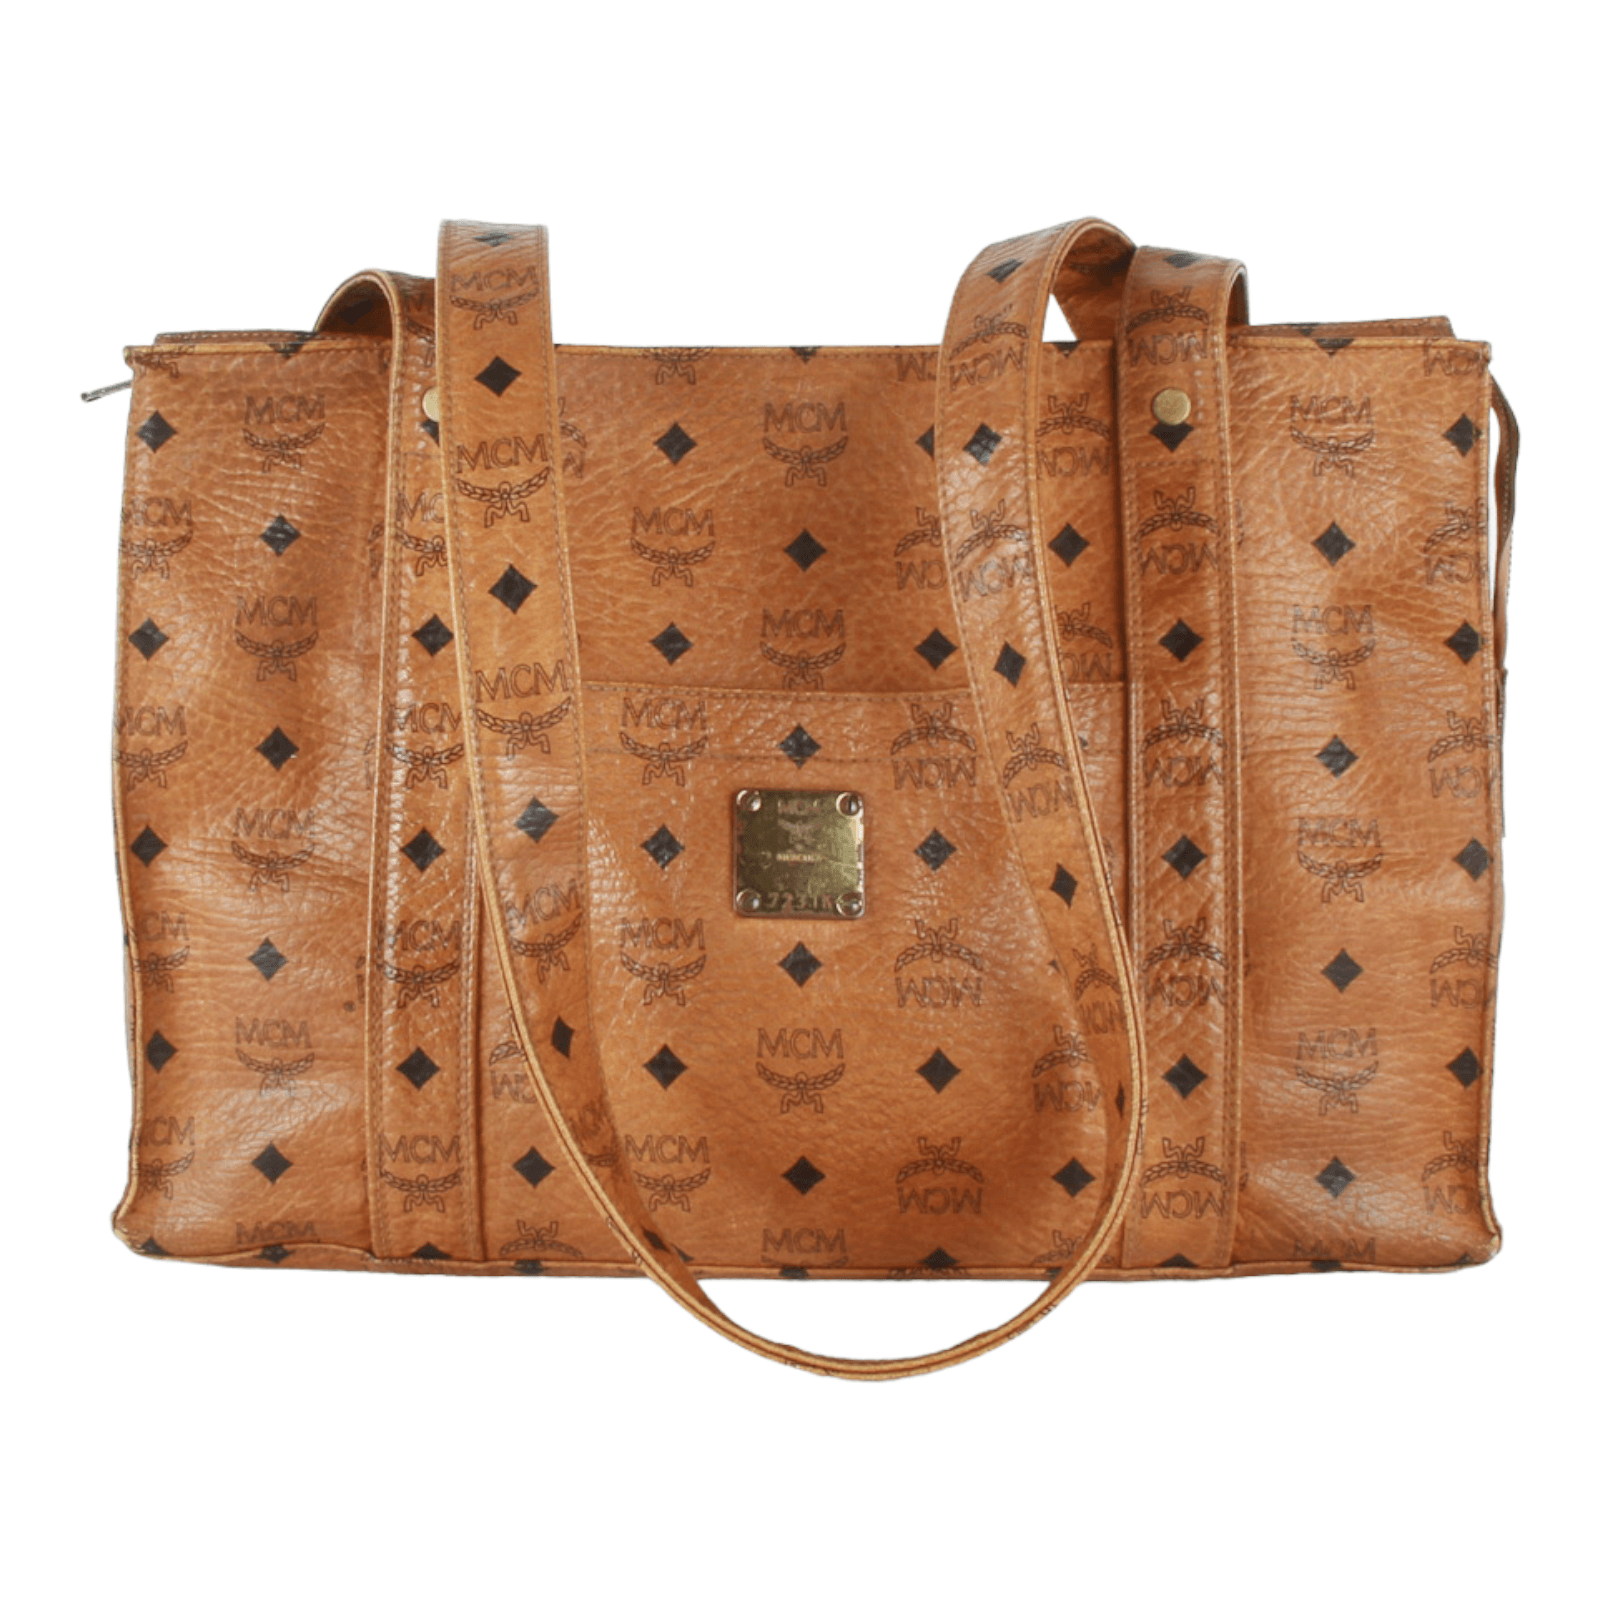 How to recognize an original MCM bag - Check it now !